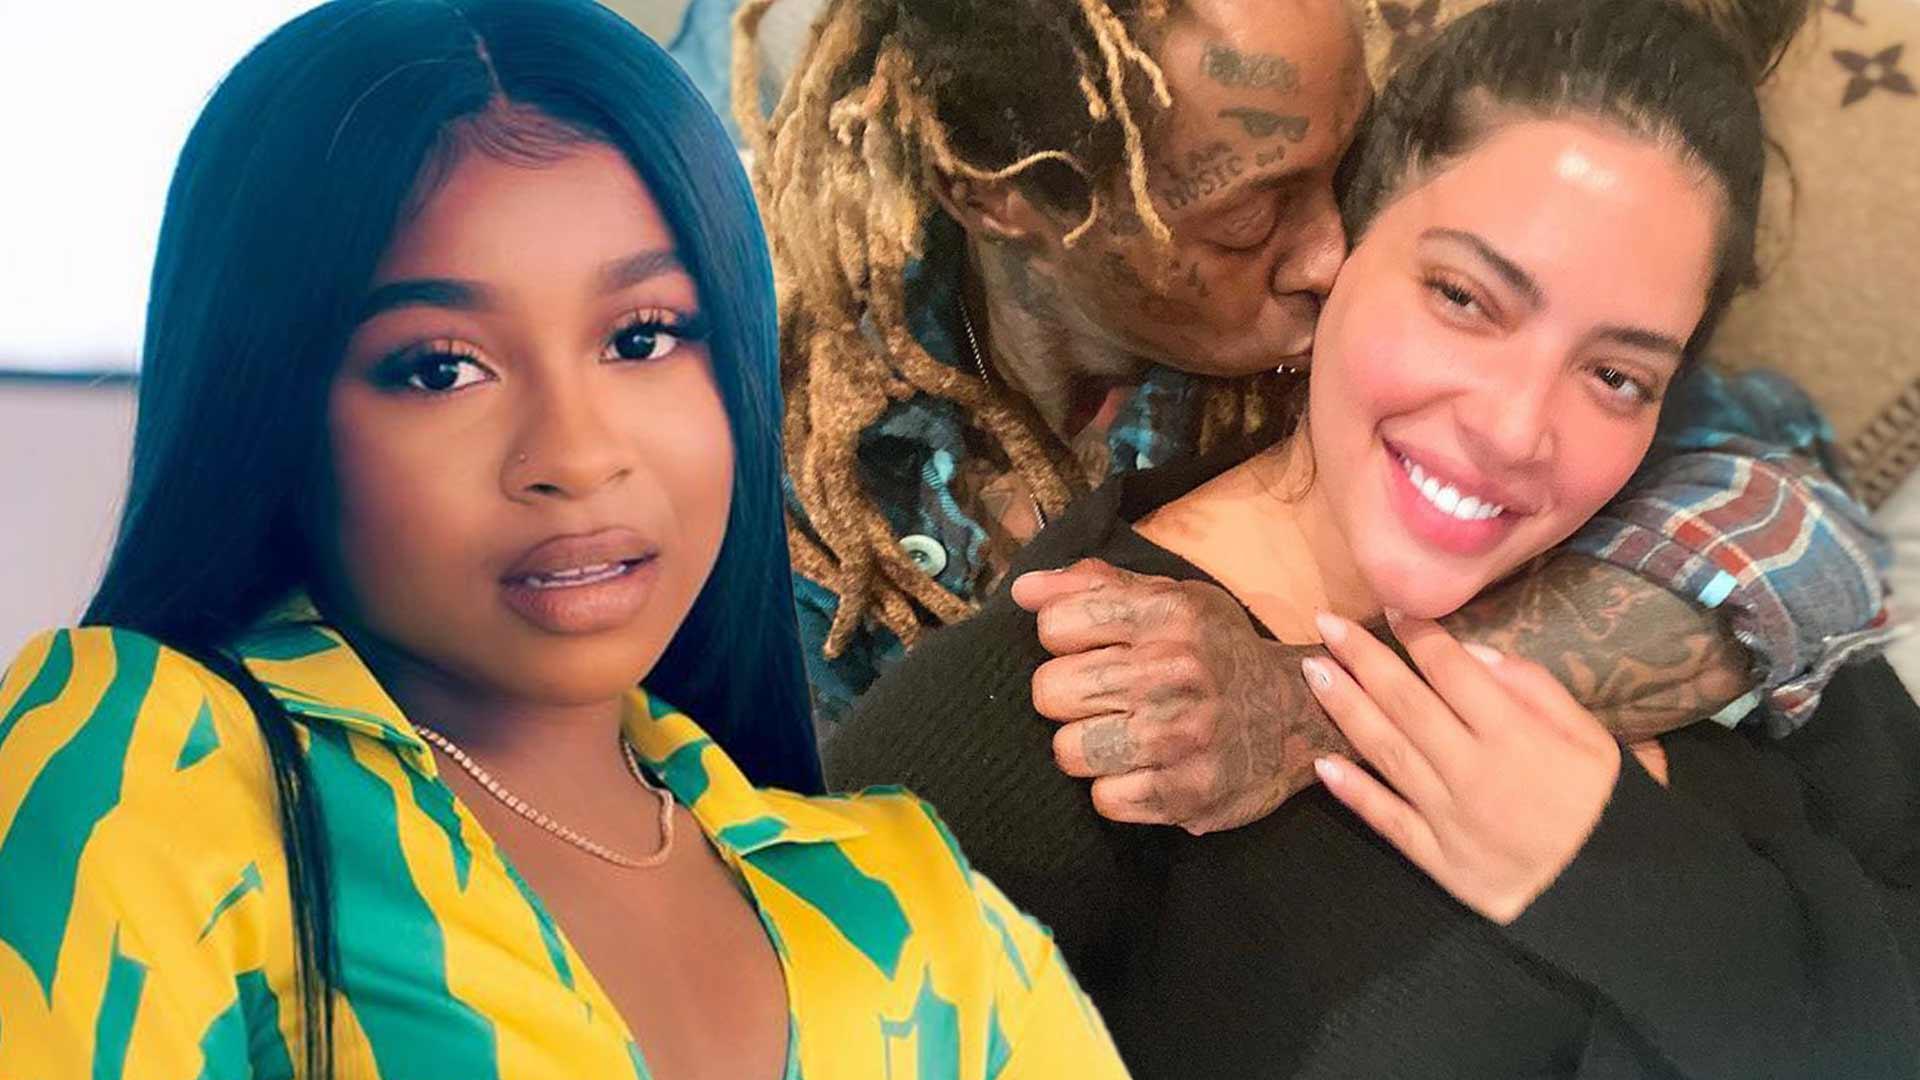 Lil Wayne’s Daughter Reginae Tells Dad And New GF Denise Bidot To ‘Get A Room’ After Public PDA Pic